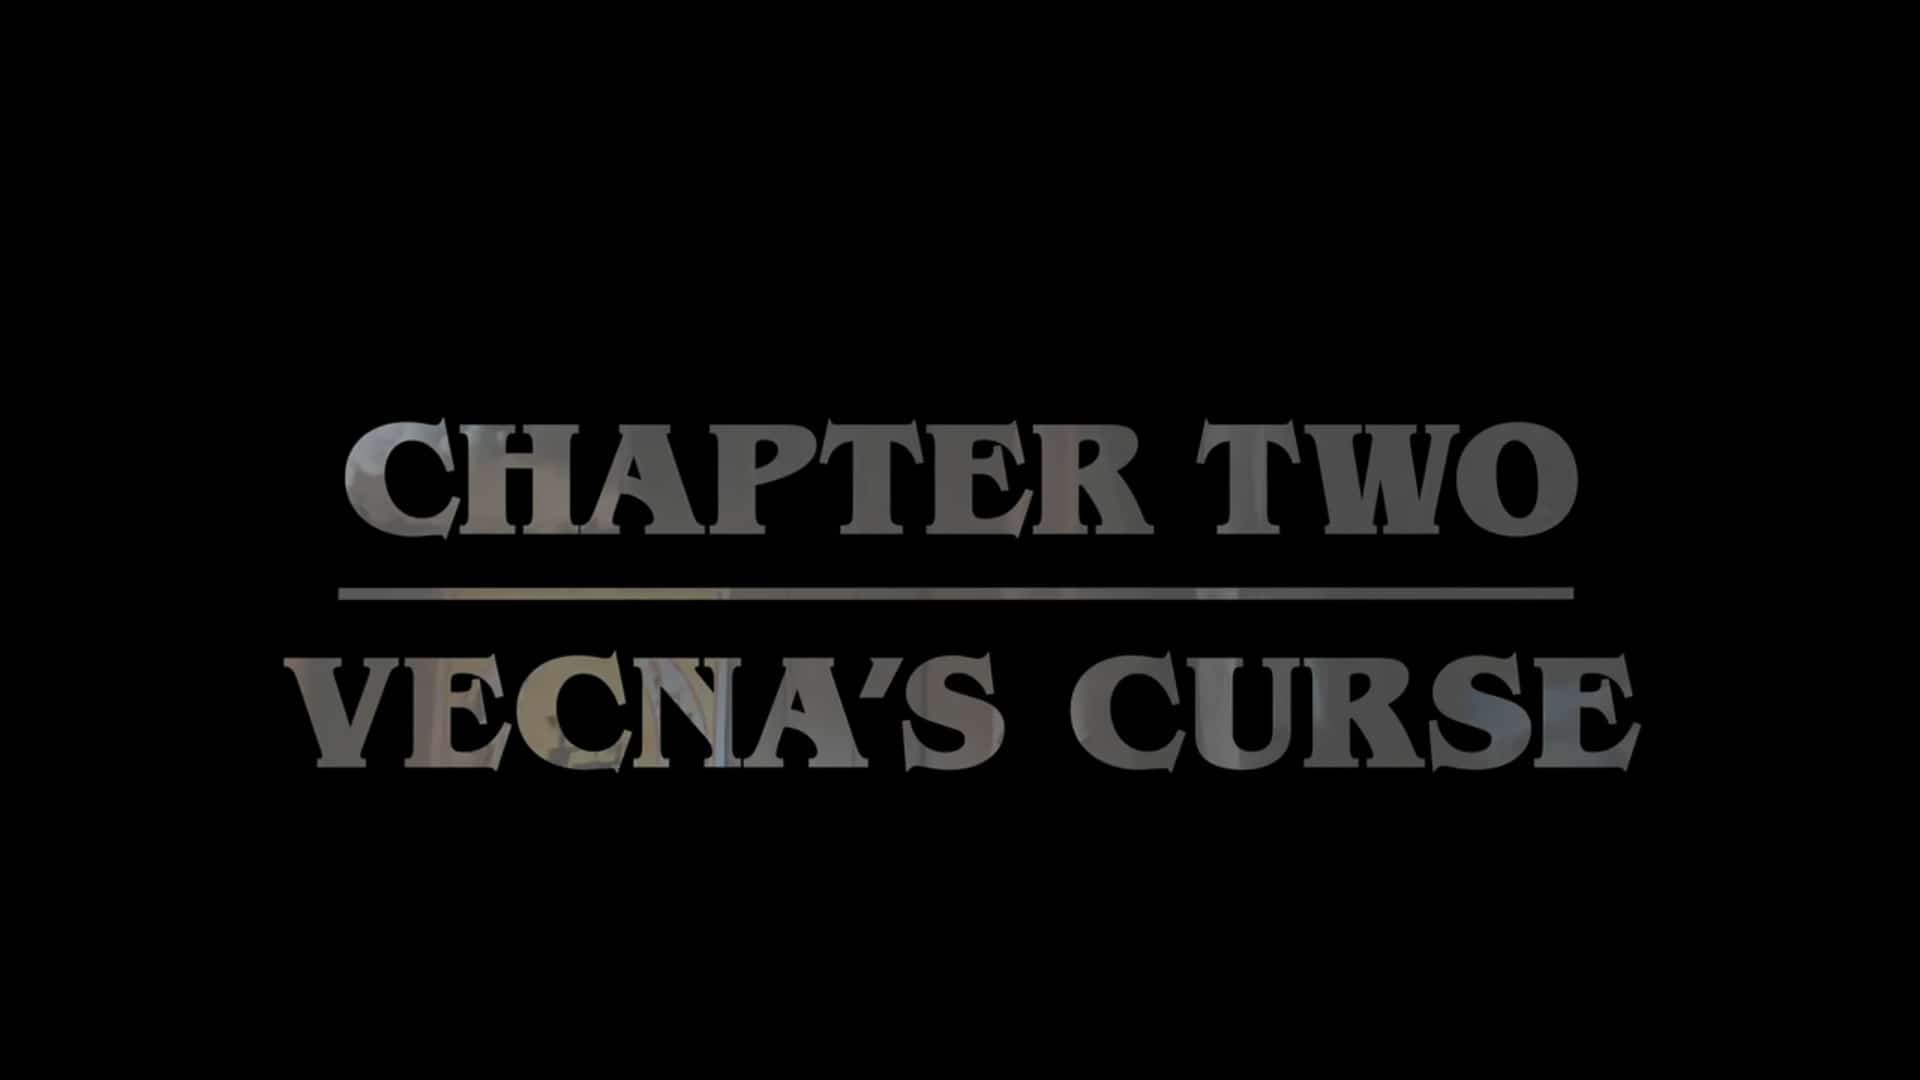 Stranger Things: Season 4/ Episode 2 “Chapter Two: Vecna’s Curse” – Recap/ Review (with Spoilers)